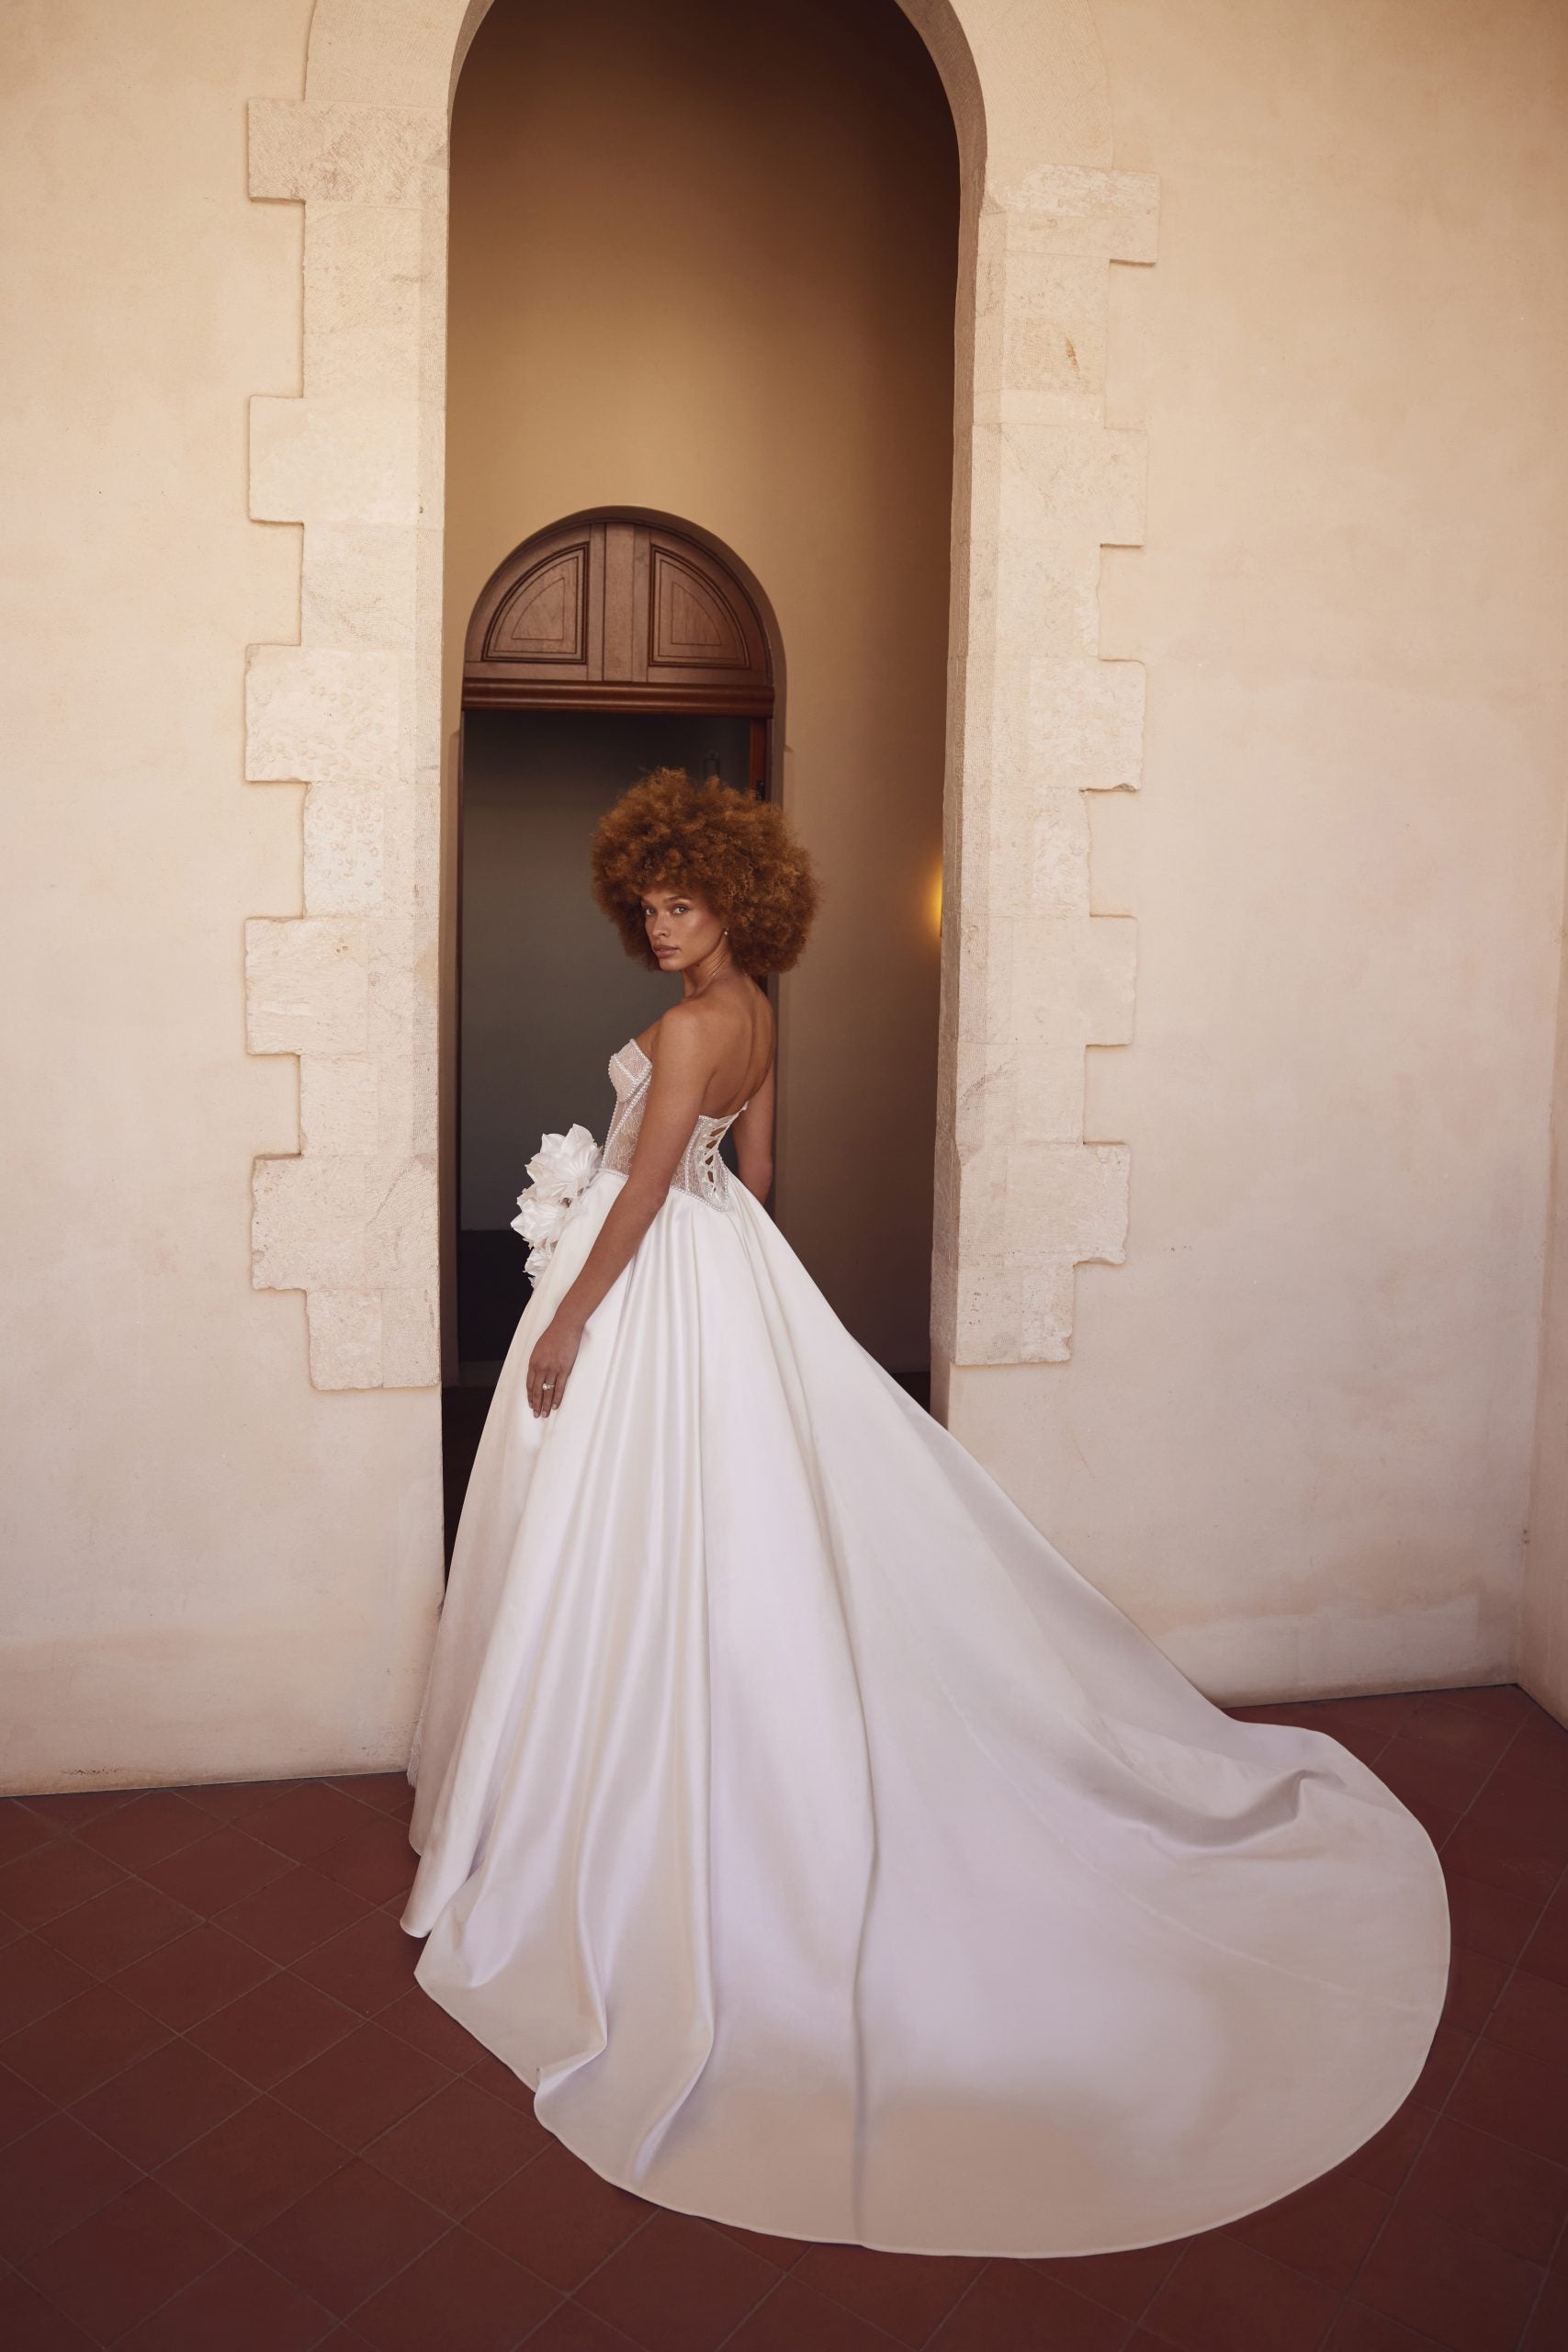 Lace And Satin A-Line Wedding Dress With Sheer Corset Bodice by Love by Pnina Tornai - Image 2